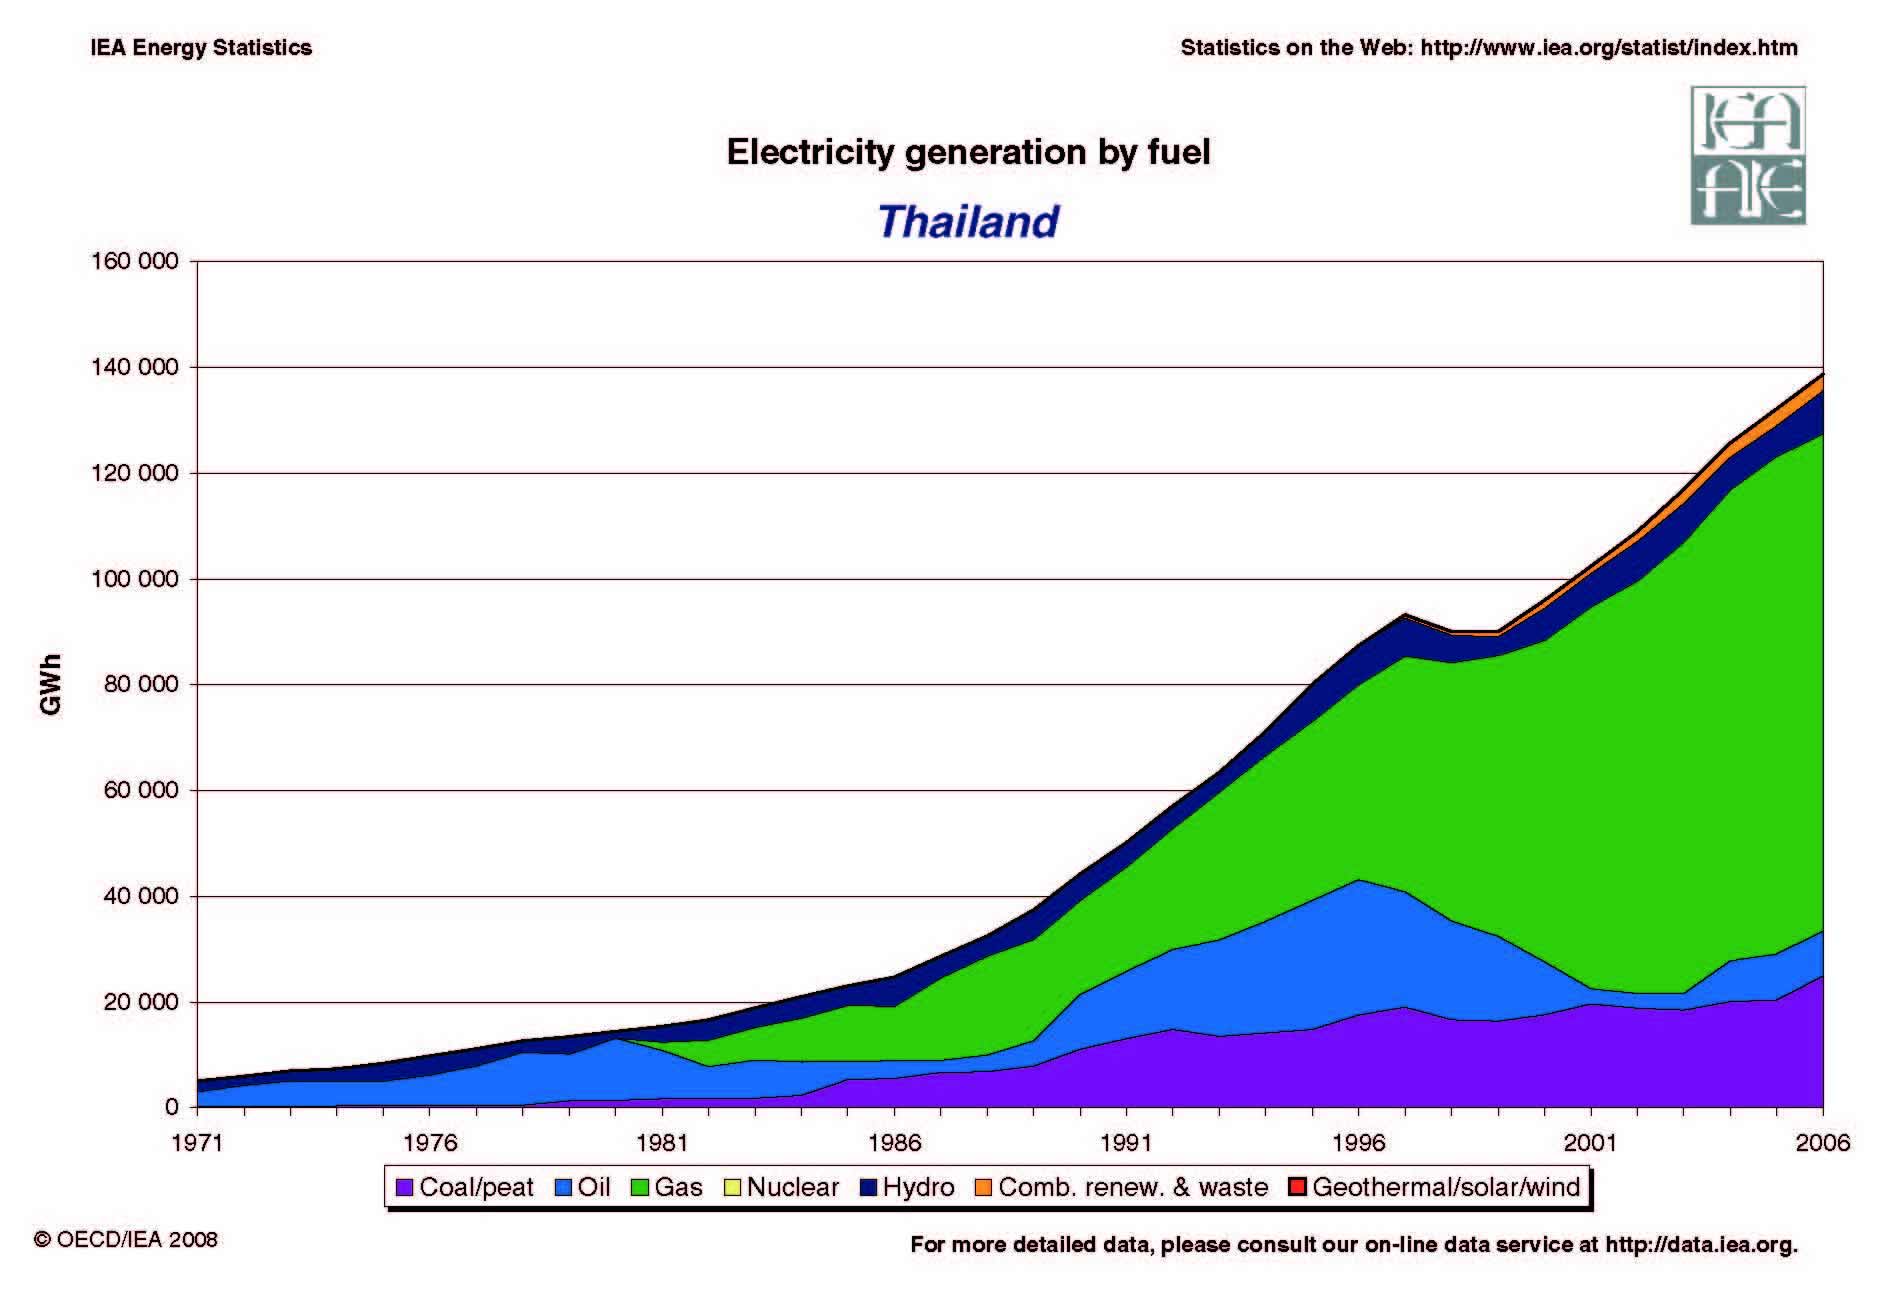 electricity generation by fuel - Thailand